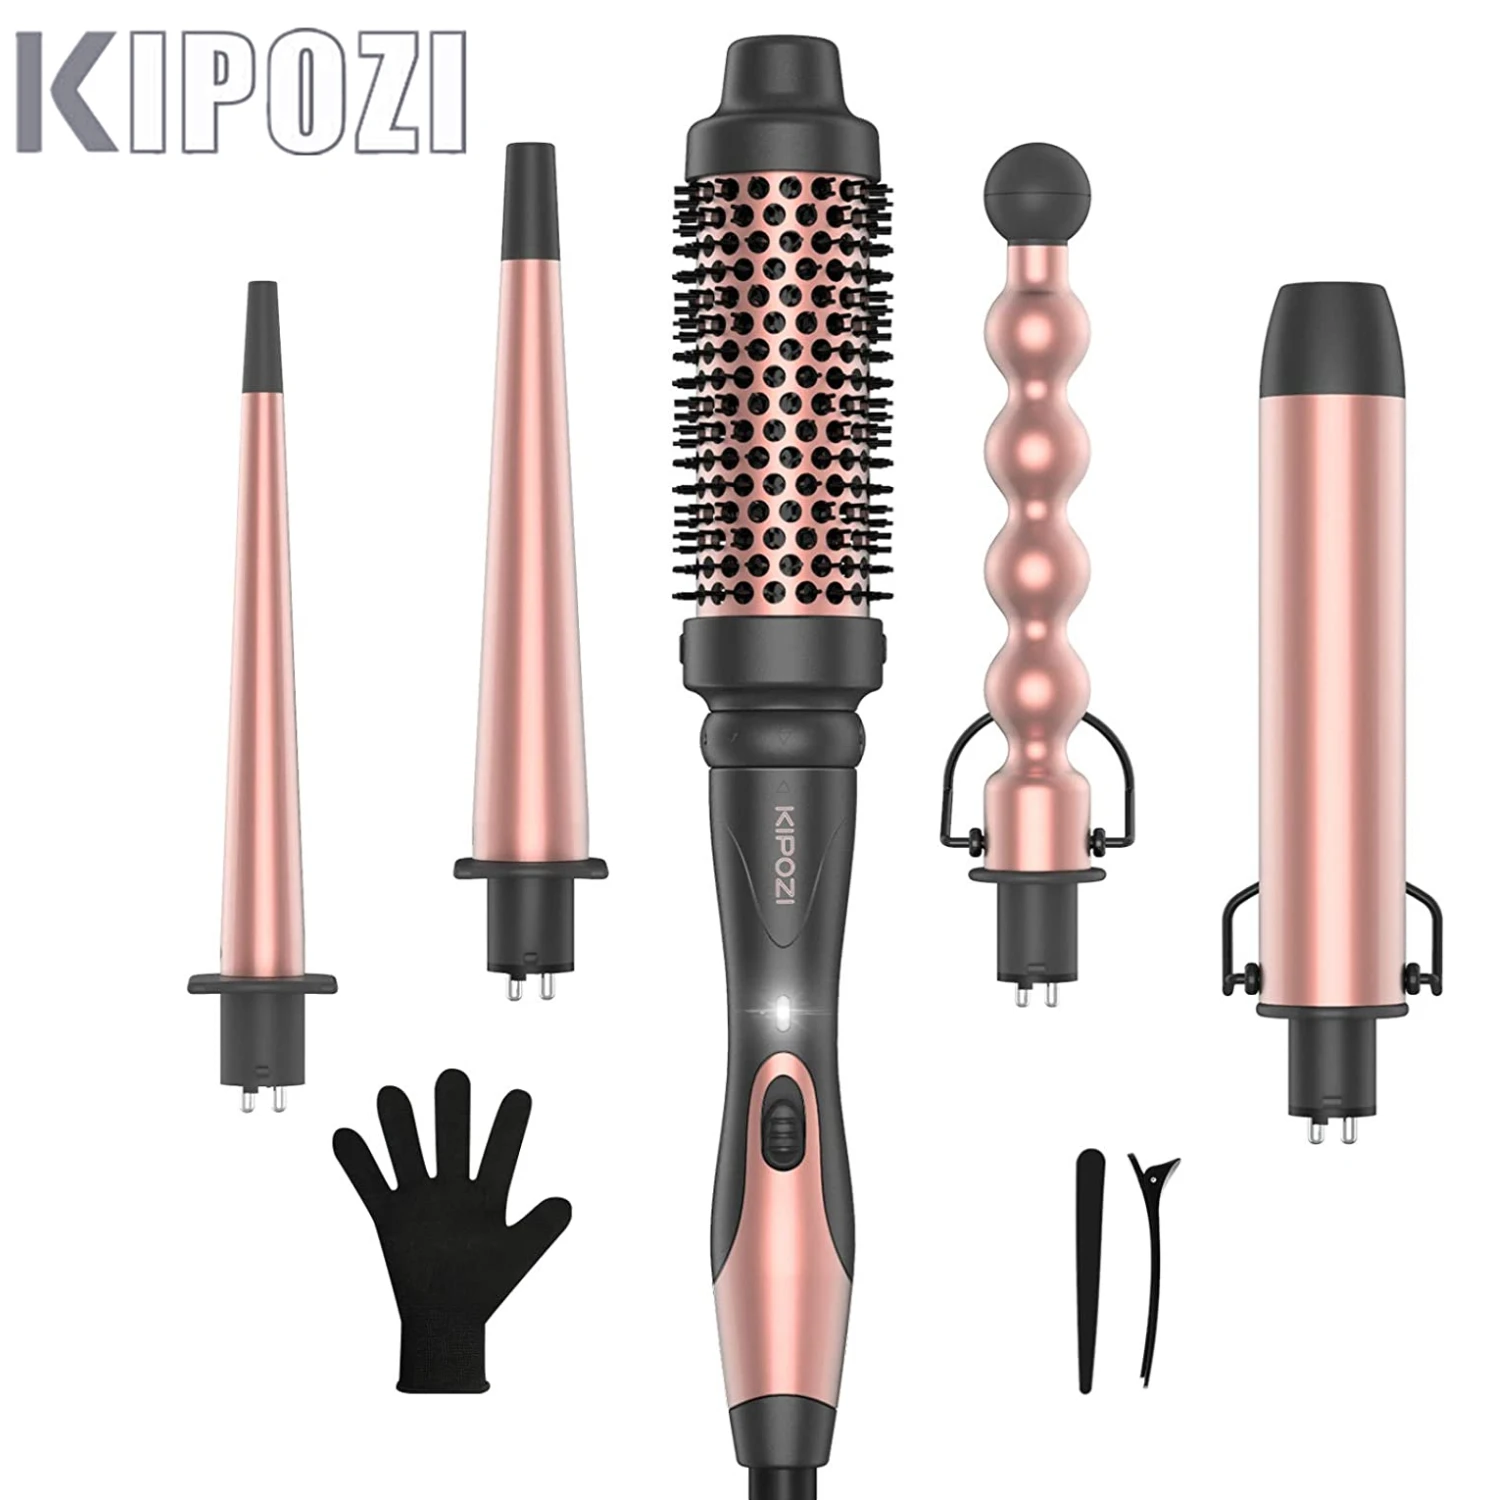 KIPOZI Professional Curling Iron 5-in-1 Hair Tools Instant Heating Electric Curling Iron Hot Air Brush Ceramic Barrels for Woman